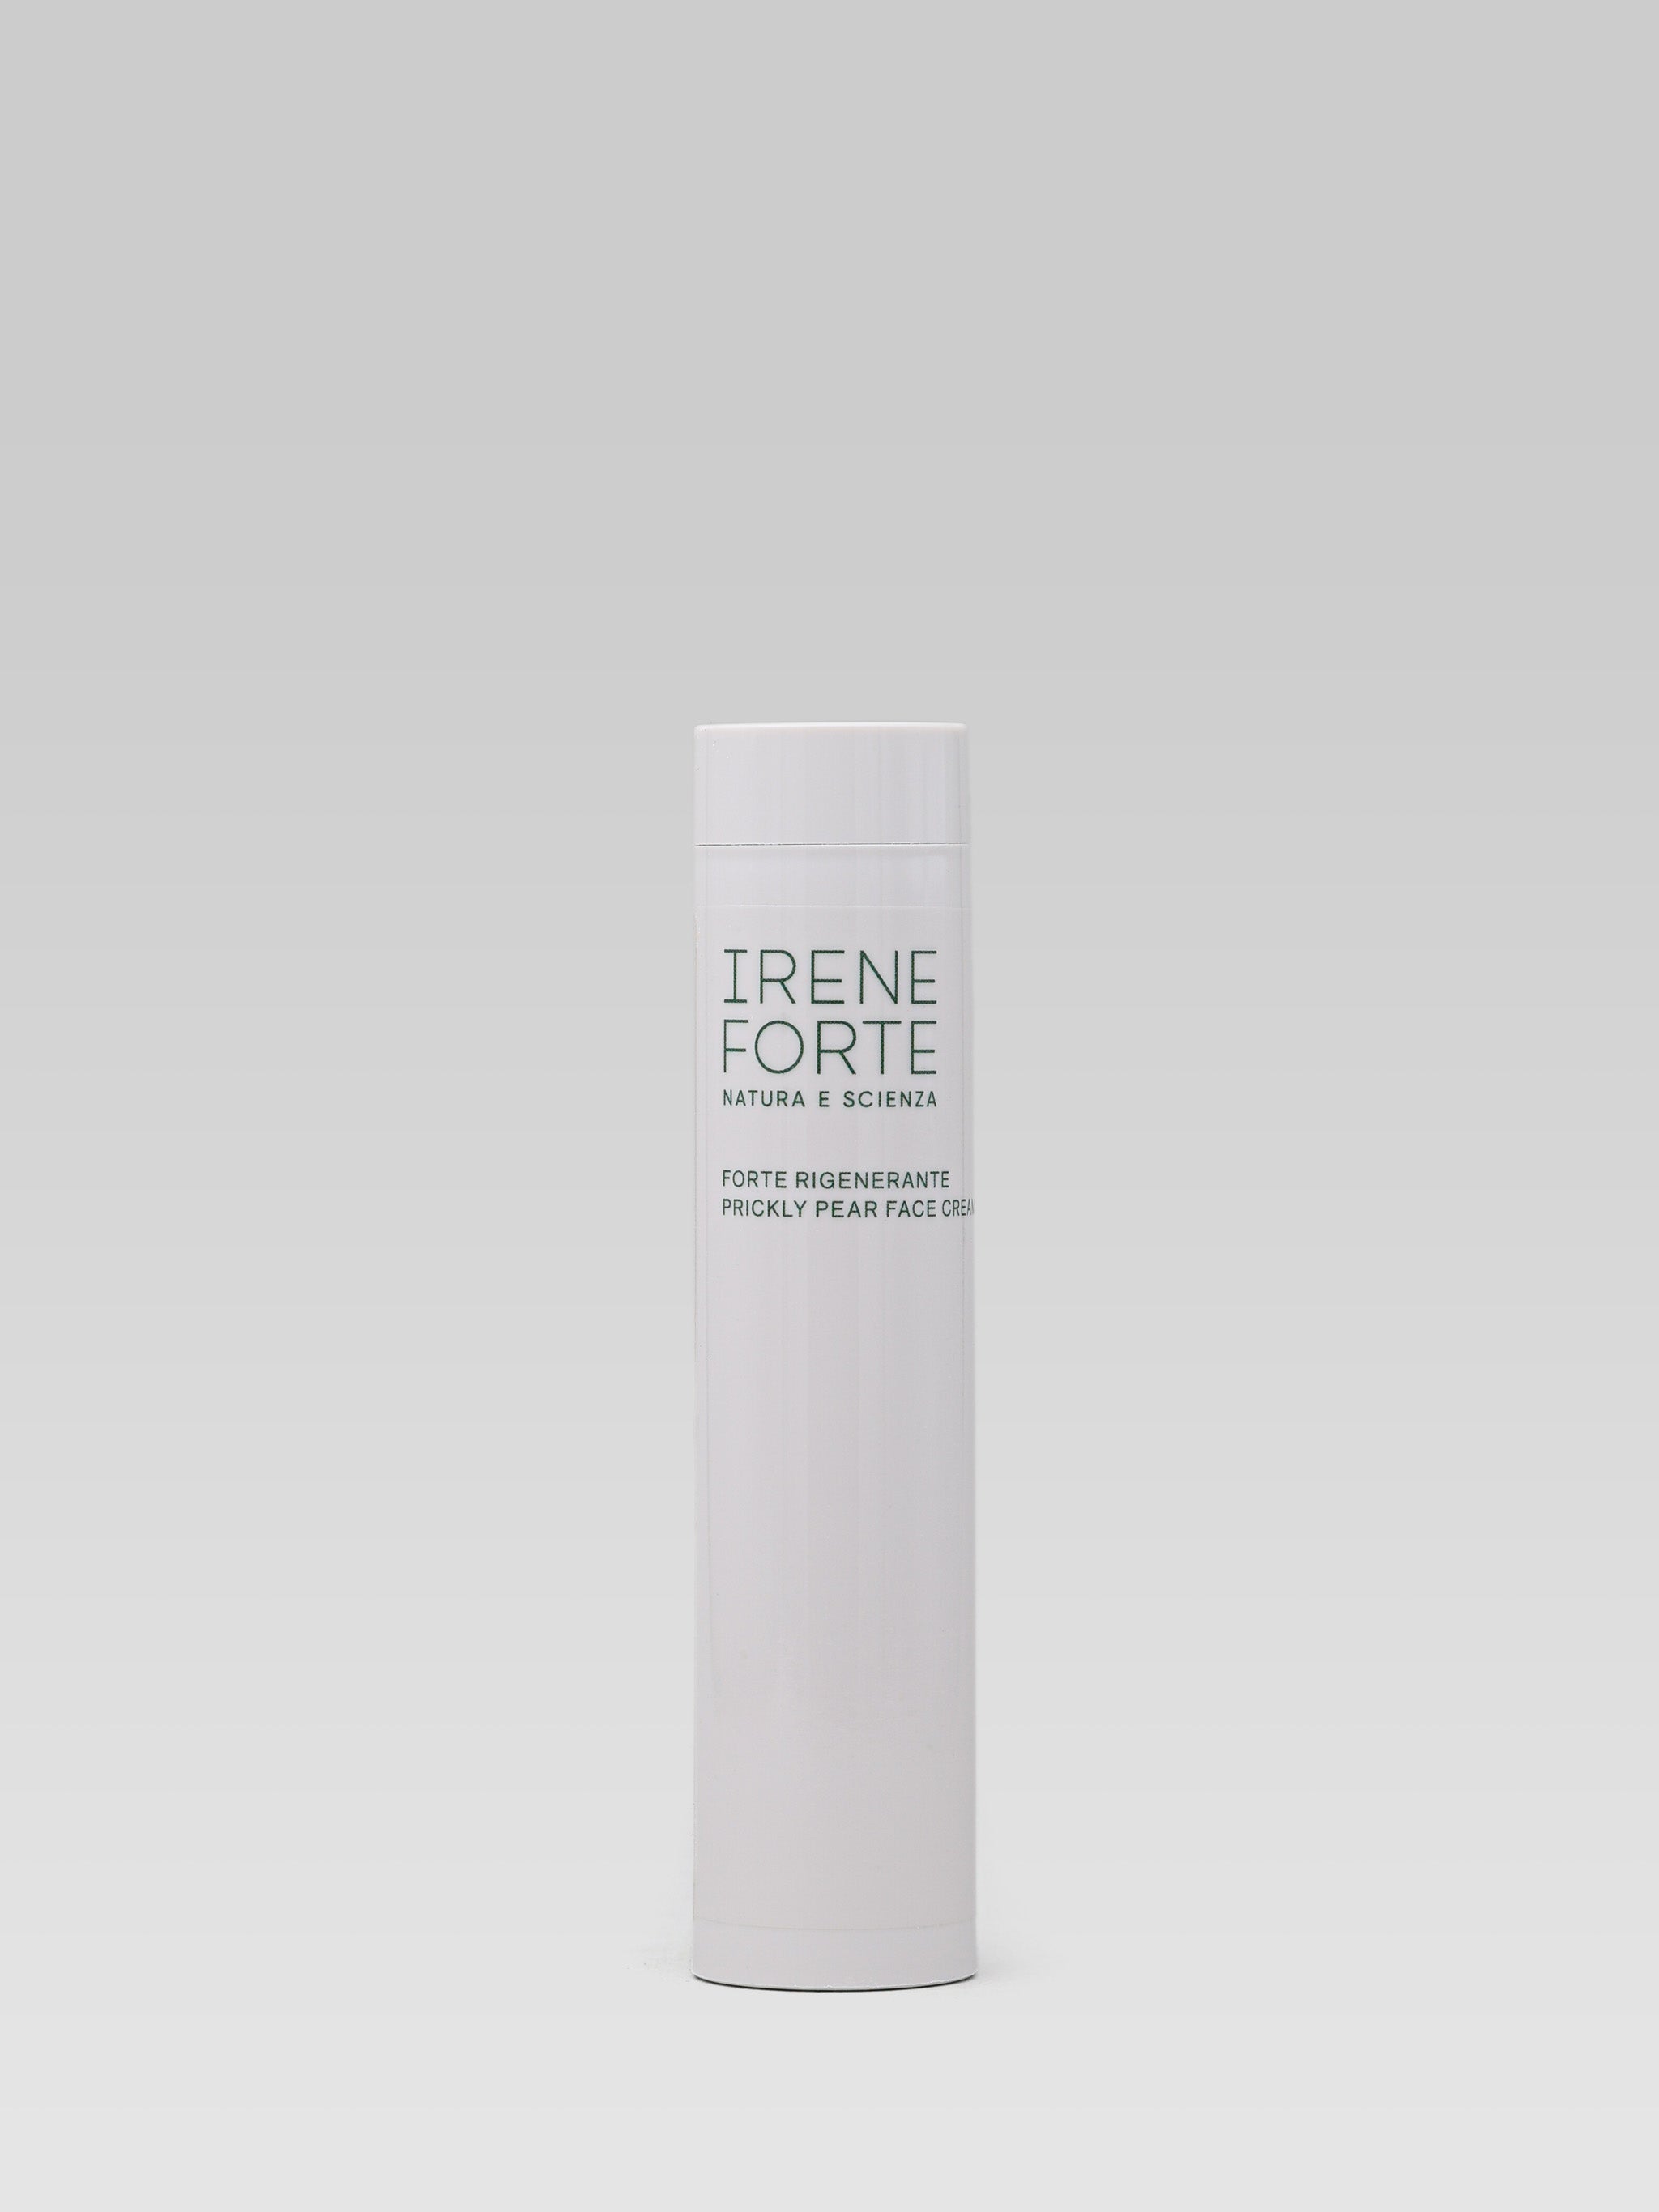 Irene Forte Prickly Pear Face Cream Refill product shot 